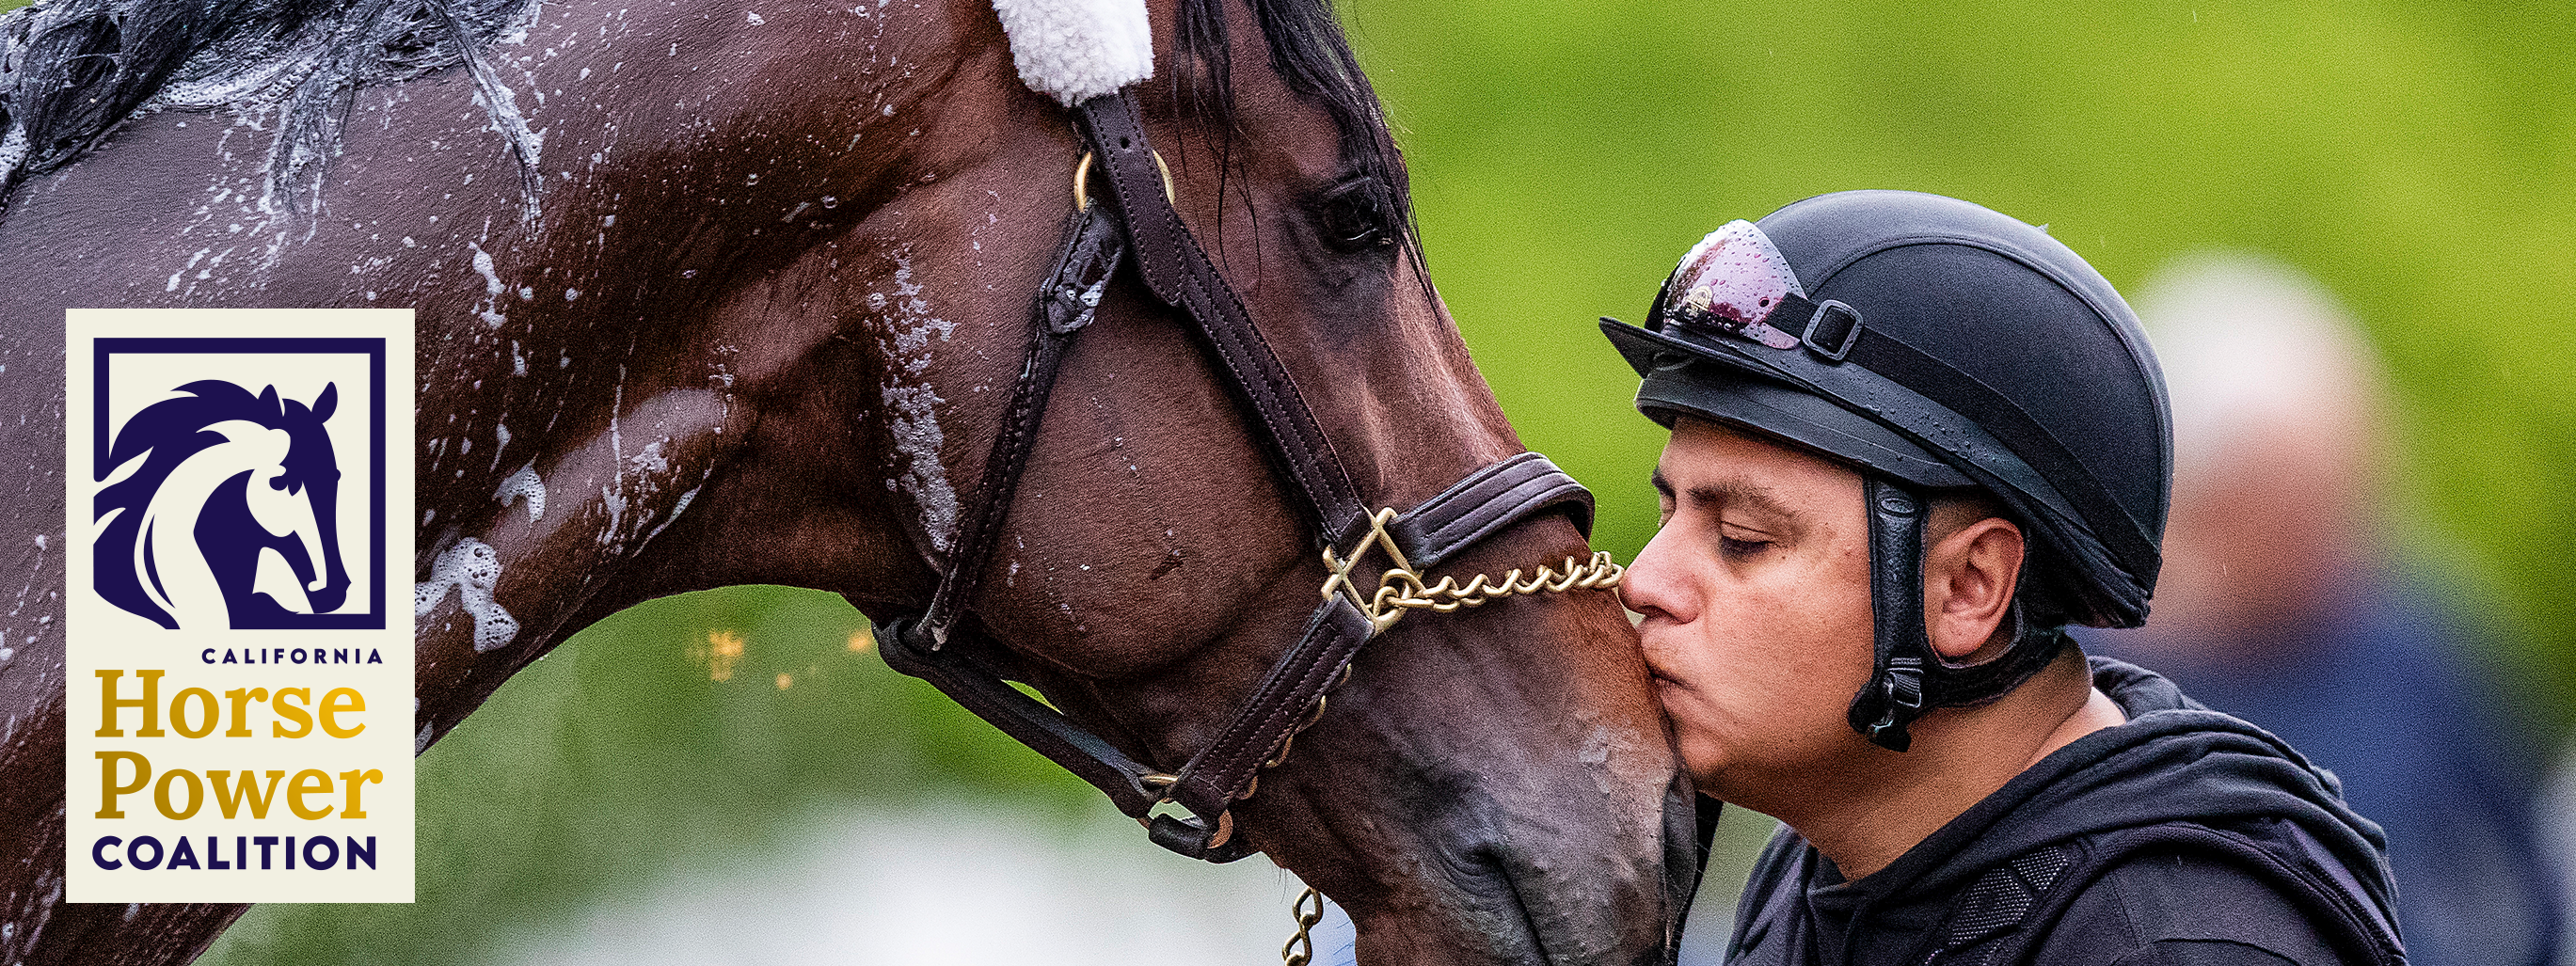 Jockey showing affection to horse